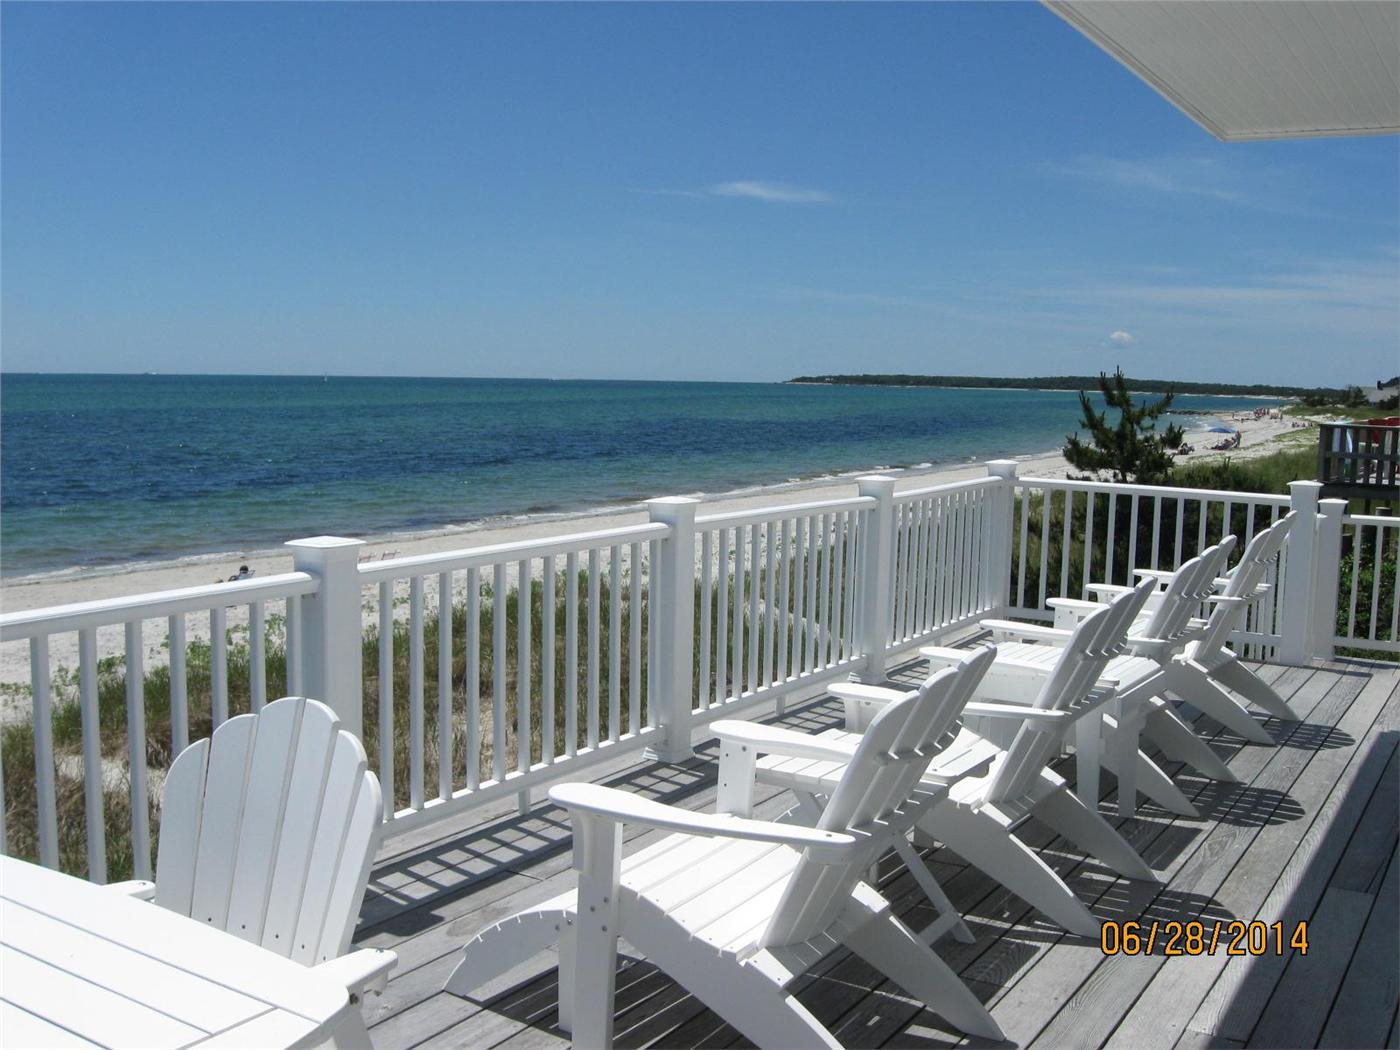 Yarmouth Vacation Rental home in Cape Cod MA 02673 On 